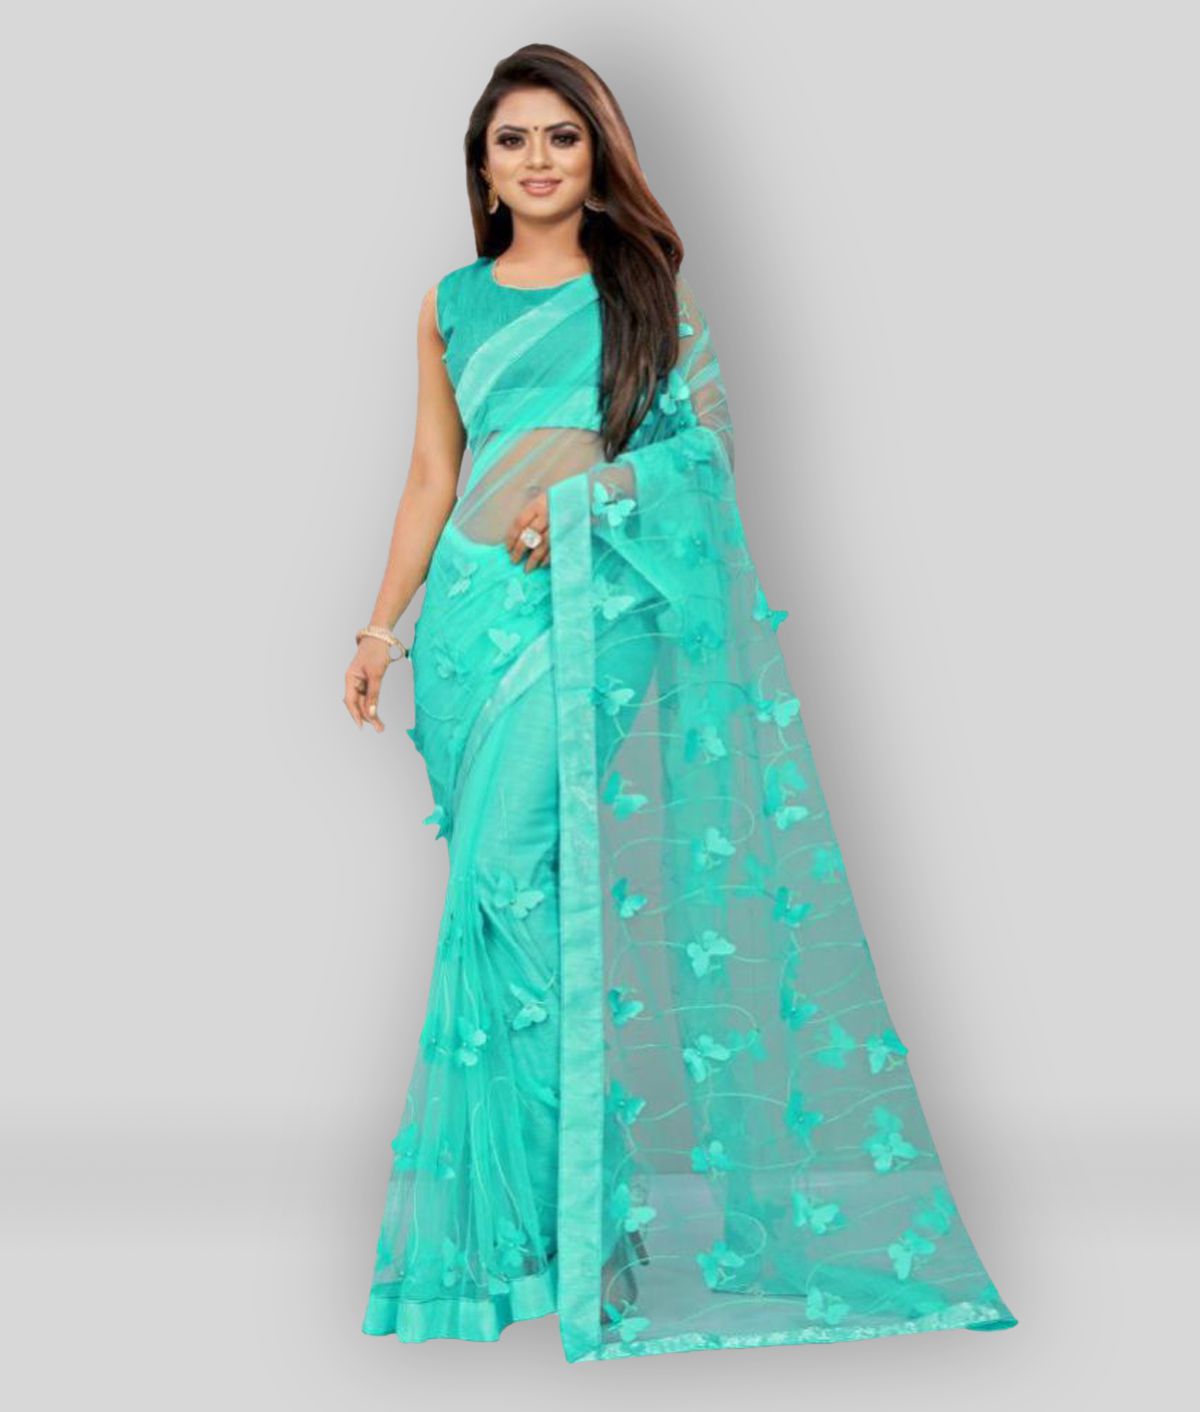     			Gazal Fashions - Sea Green Net Saree With Blouse Piece (Pack of 1)